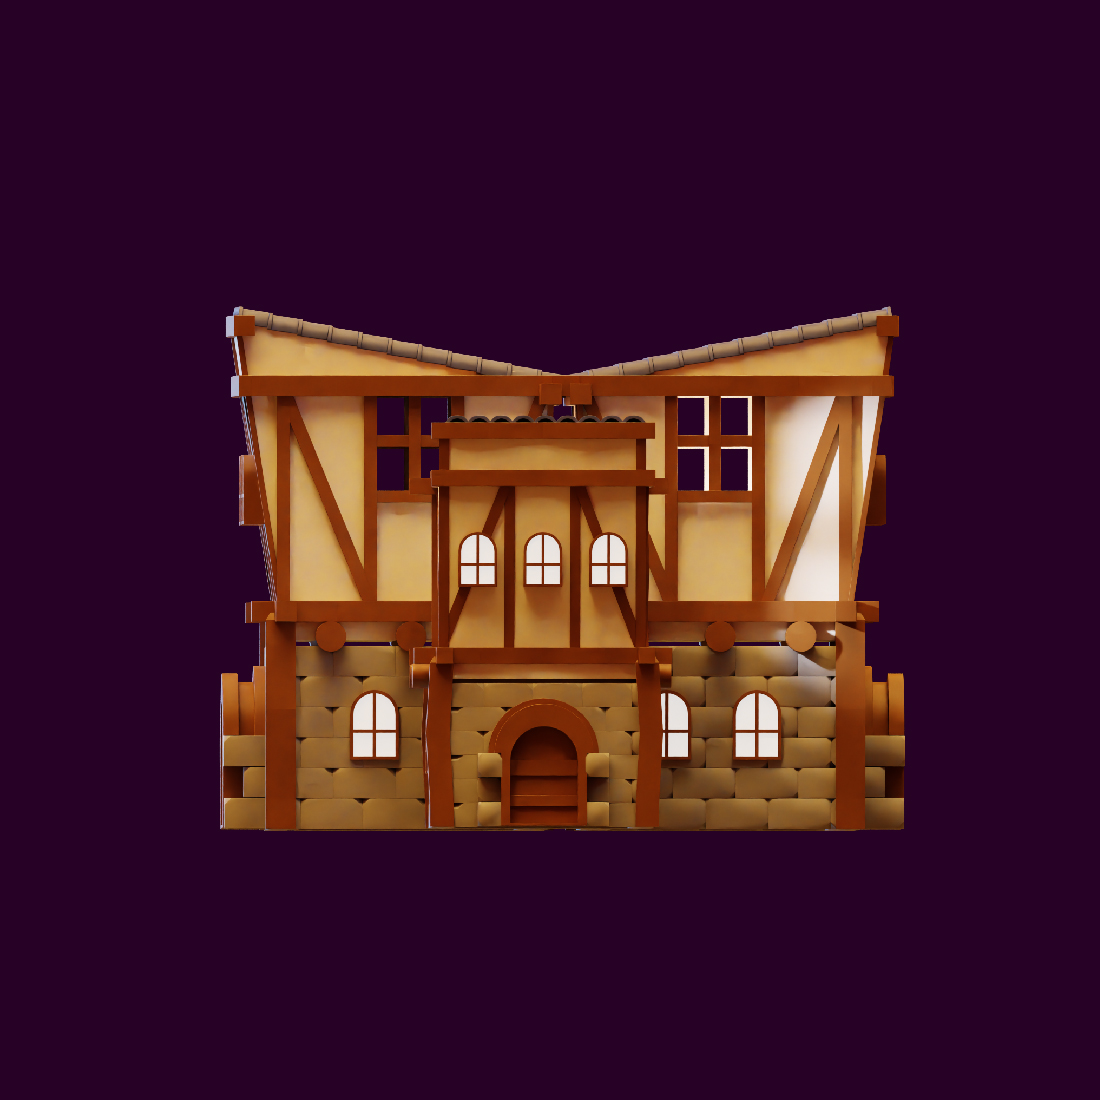 Computer generated image of a medieval house.